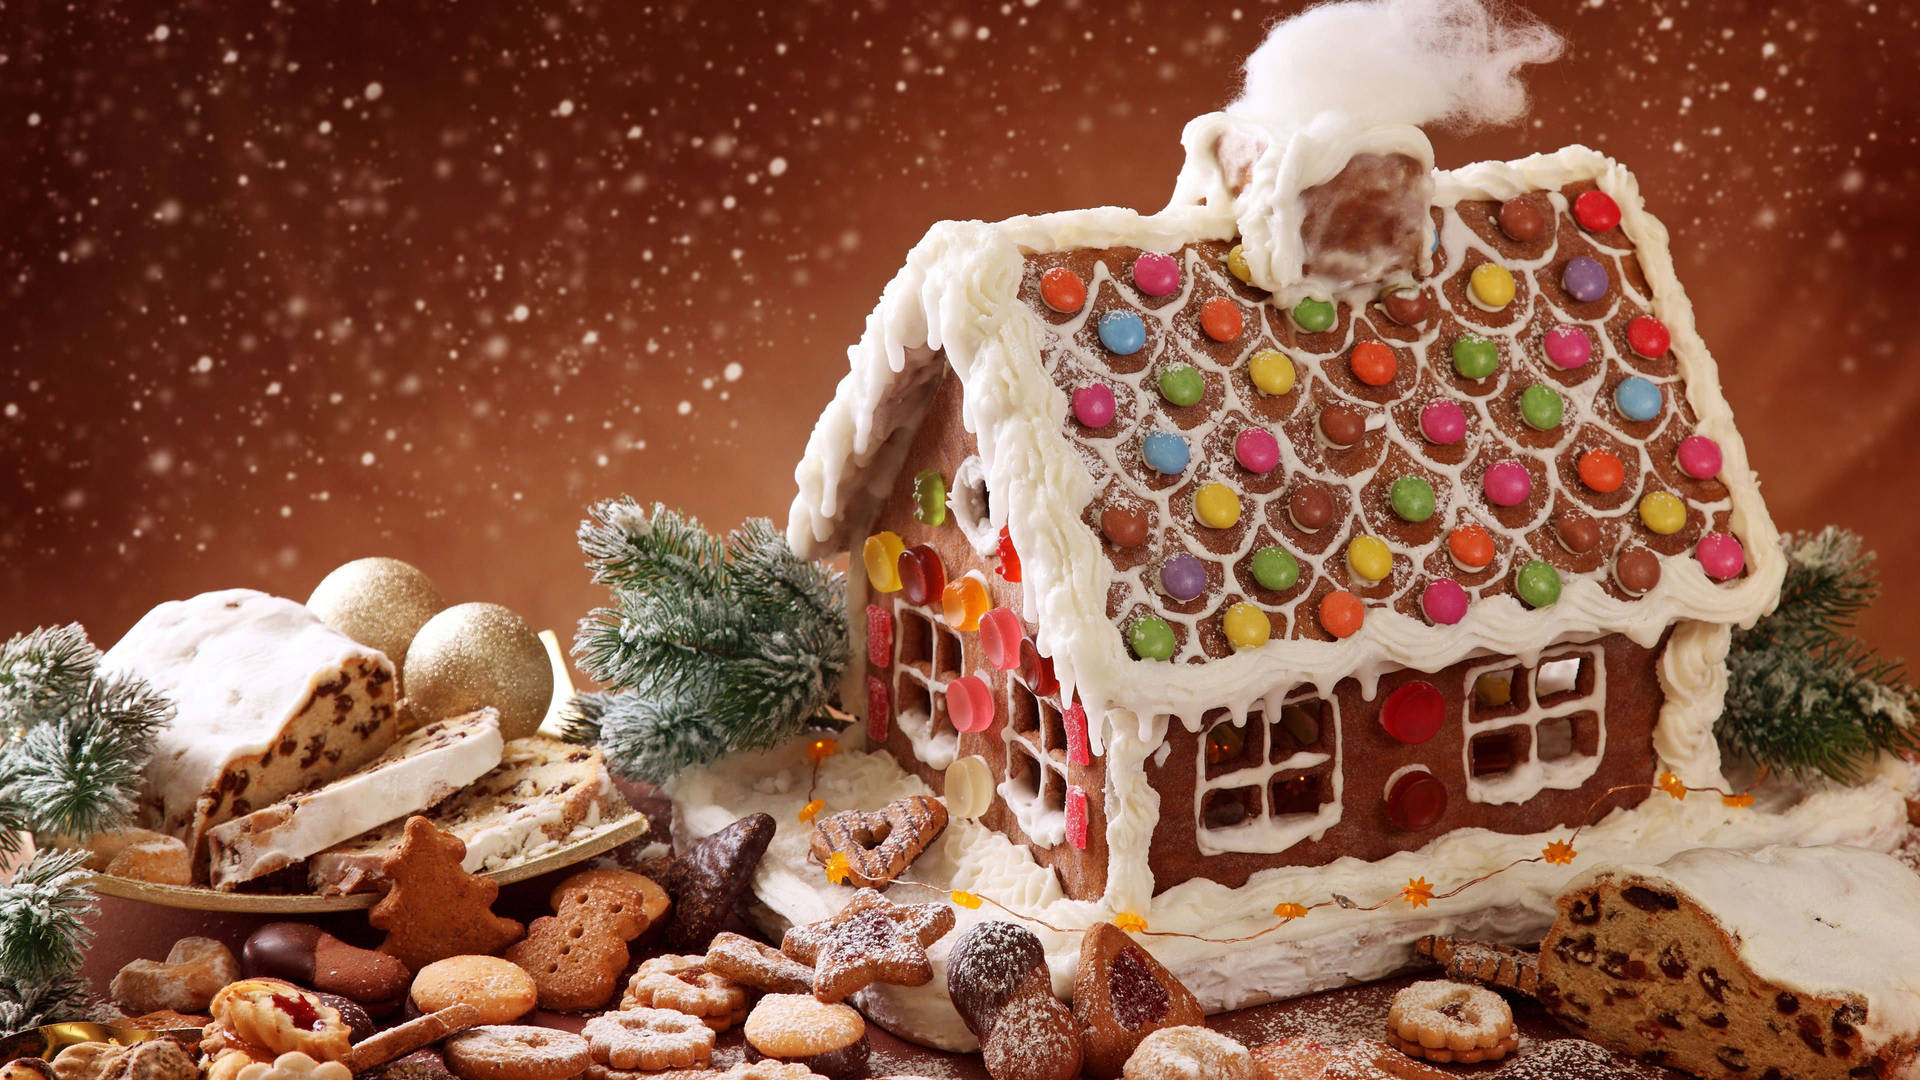 Yummy Gingerbread House And Cookies Wallpaper